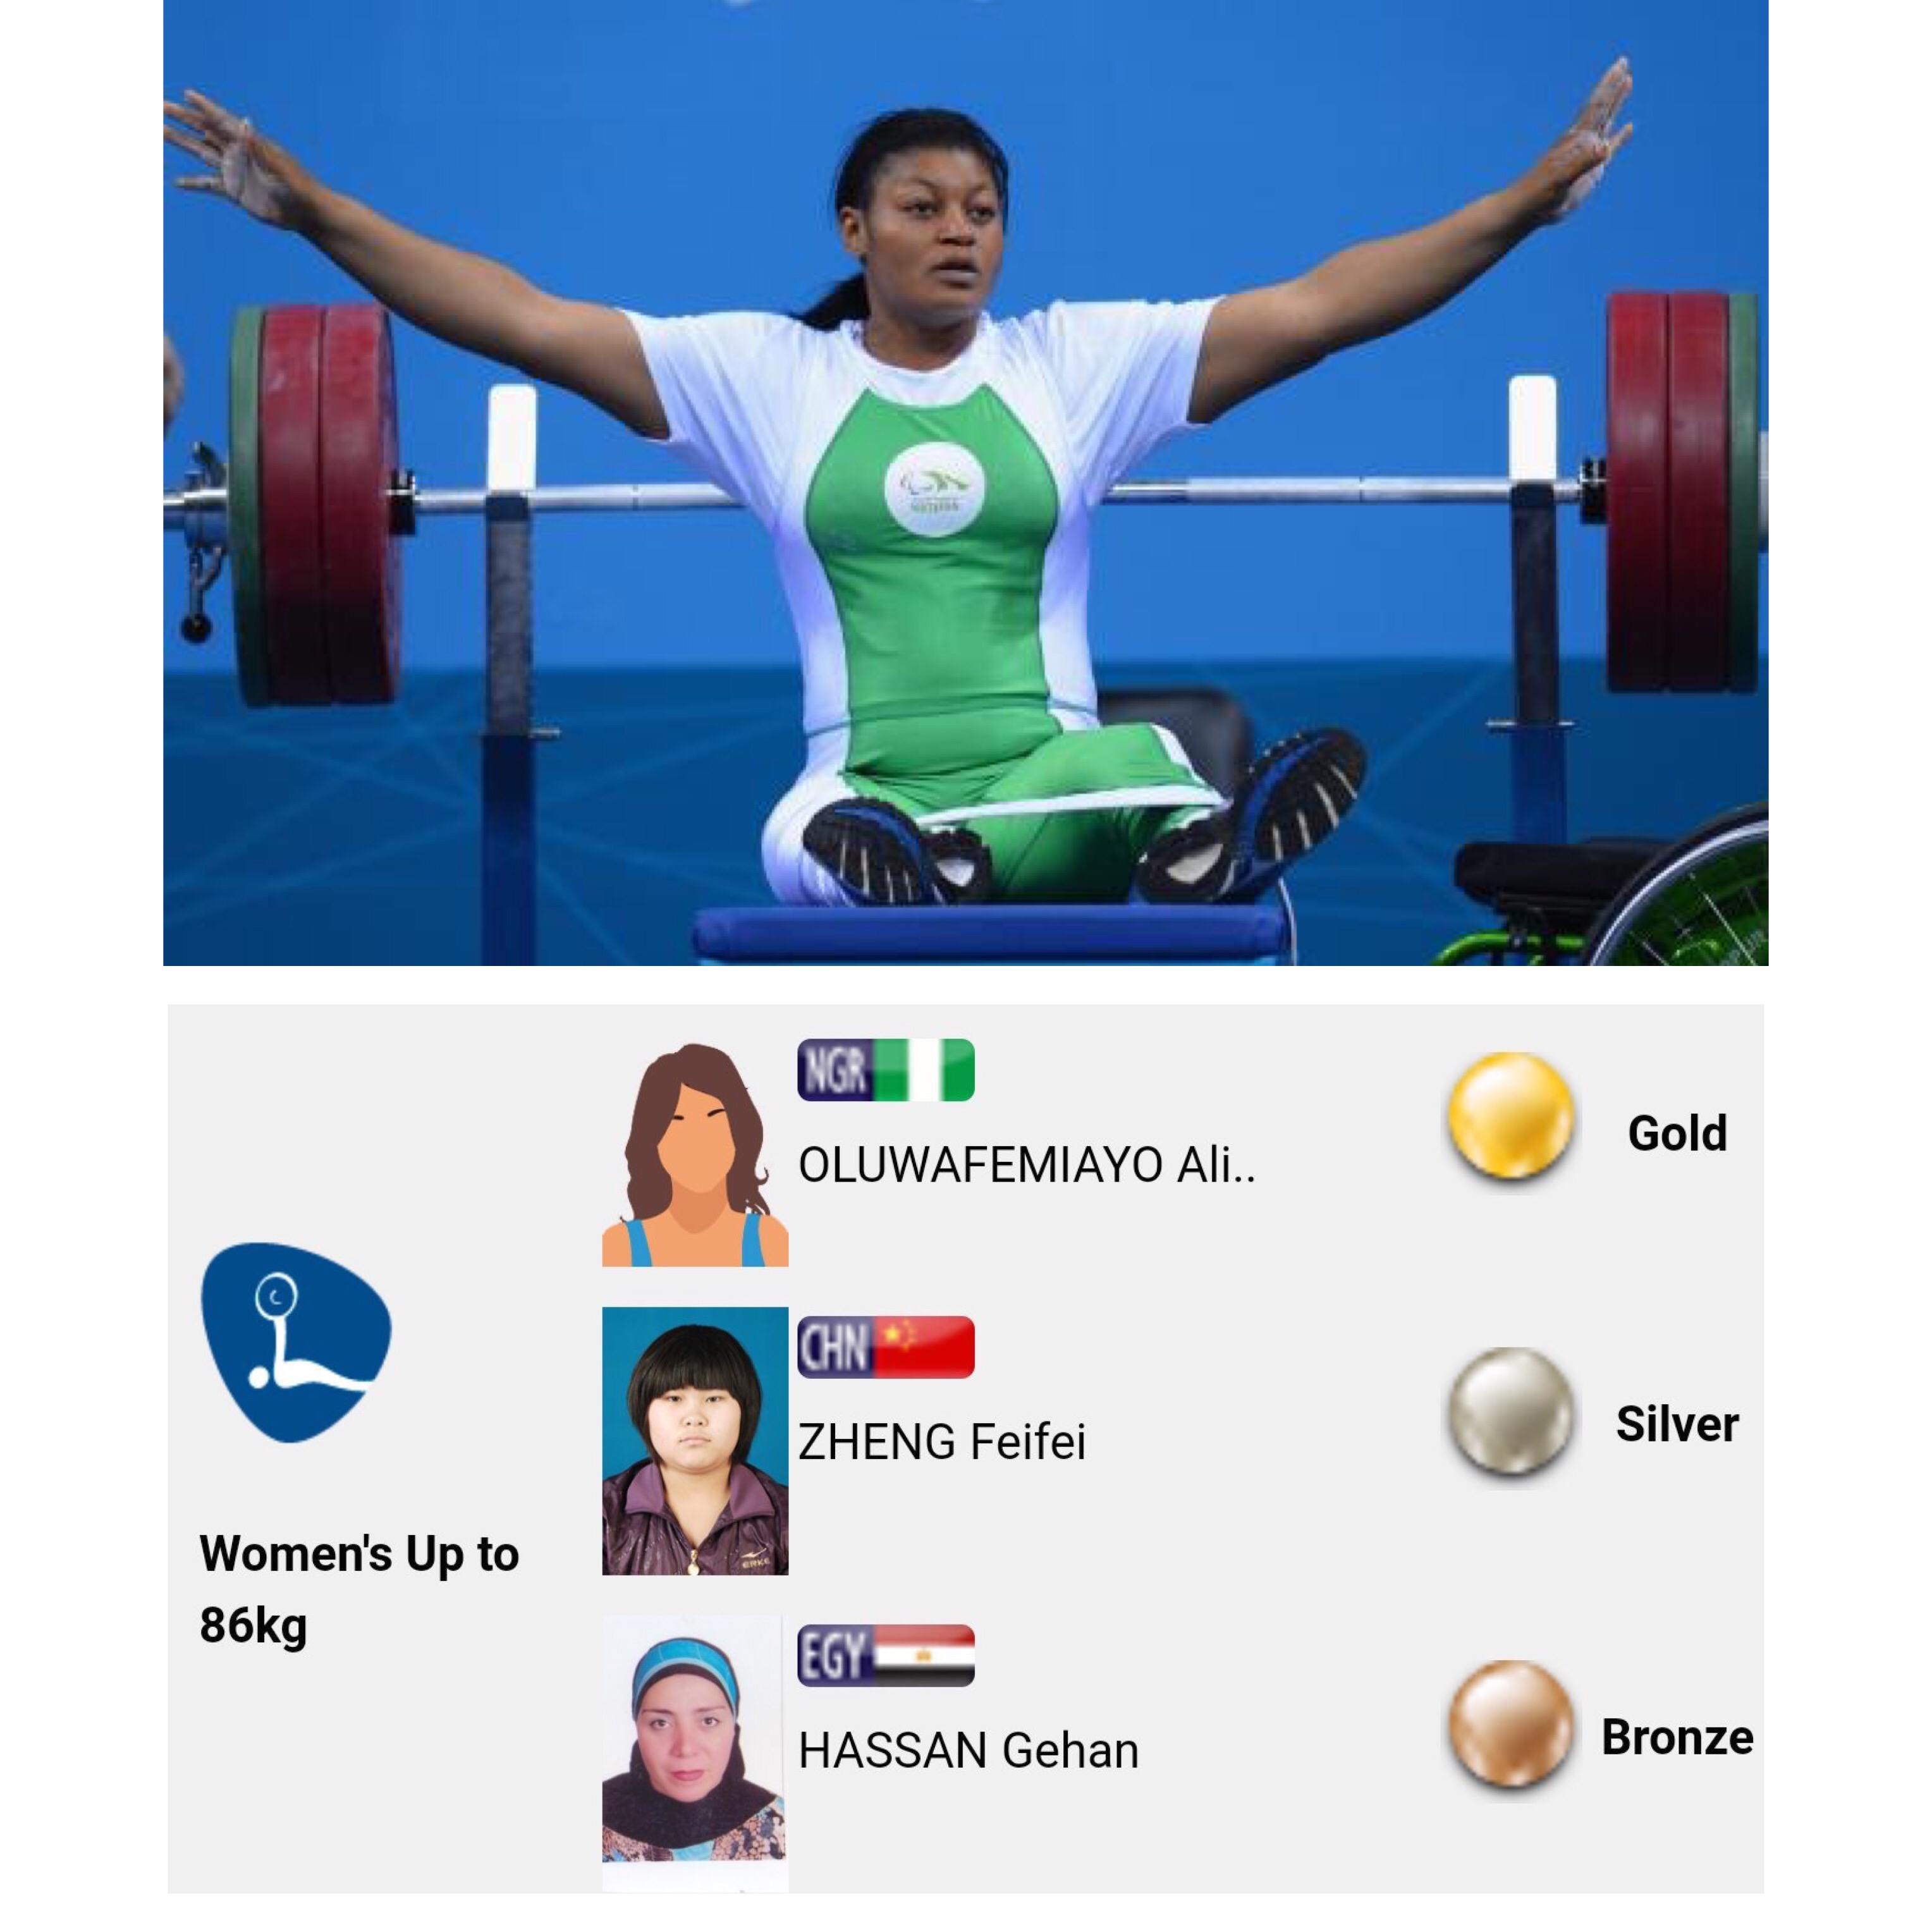 Victory for Nigeria as female weightlifter breaks world record at World Para Powerlifting Championships in Mexico 